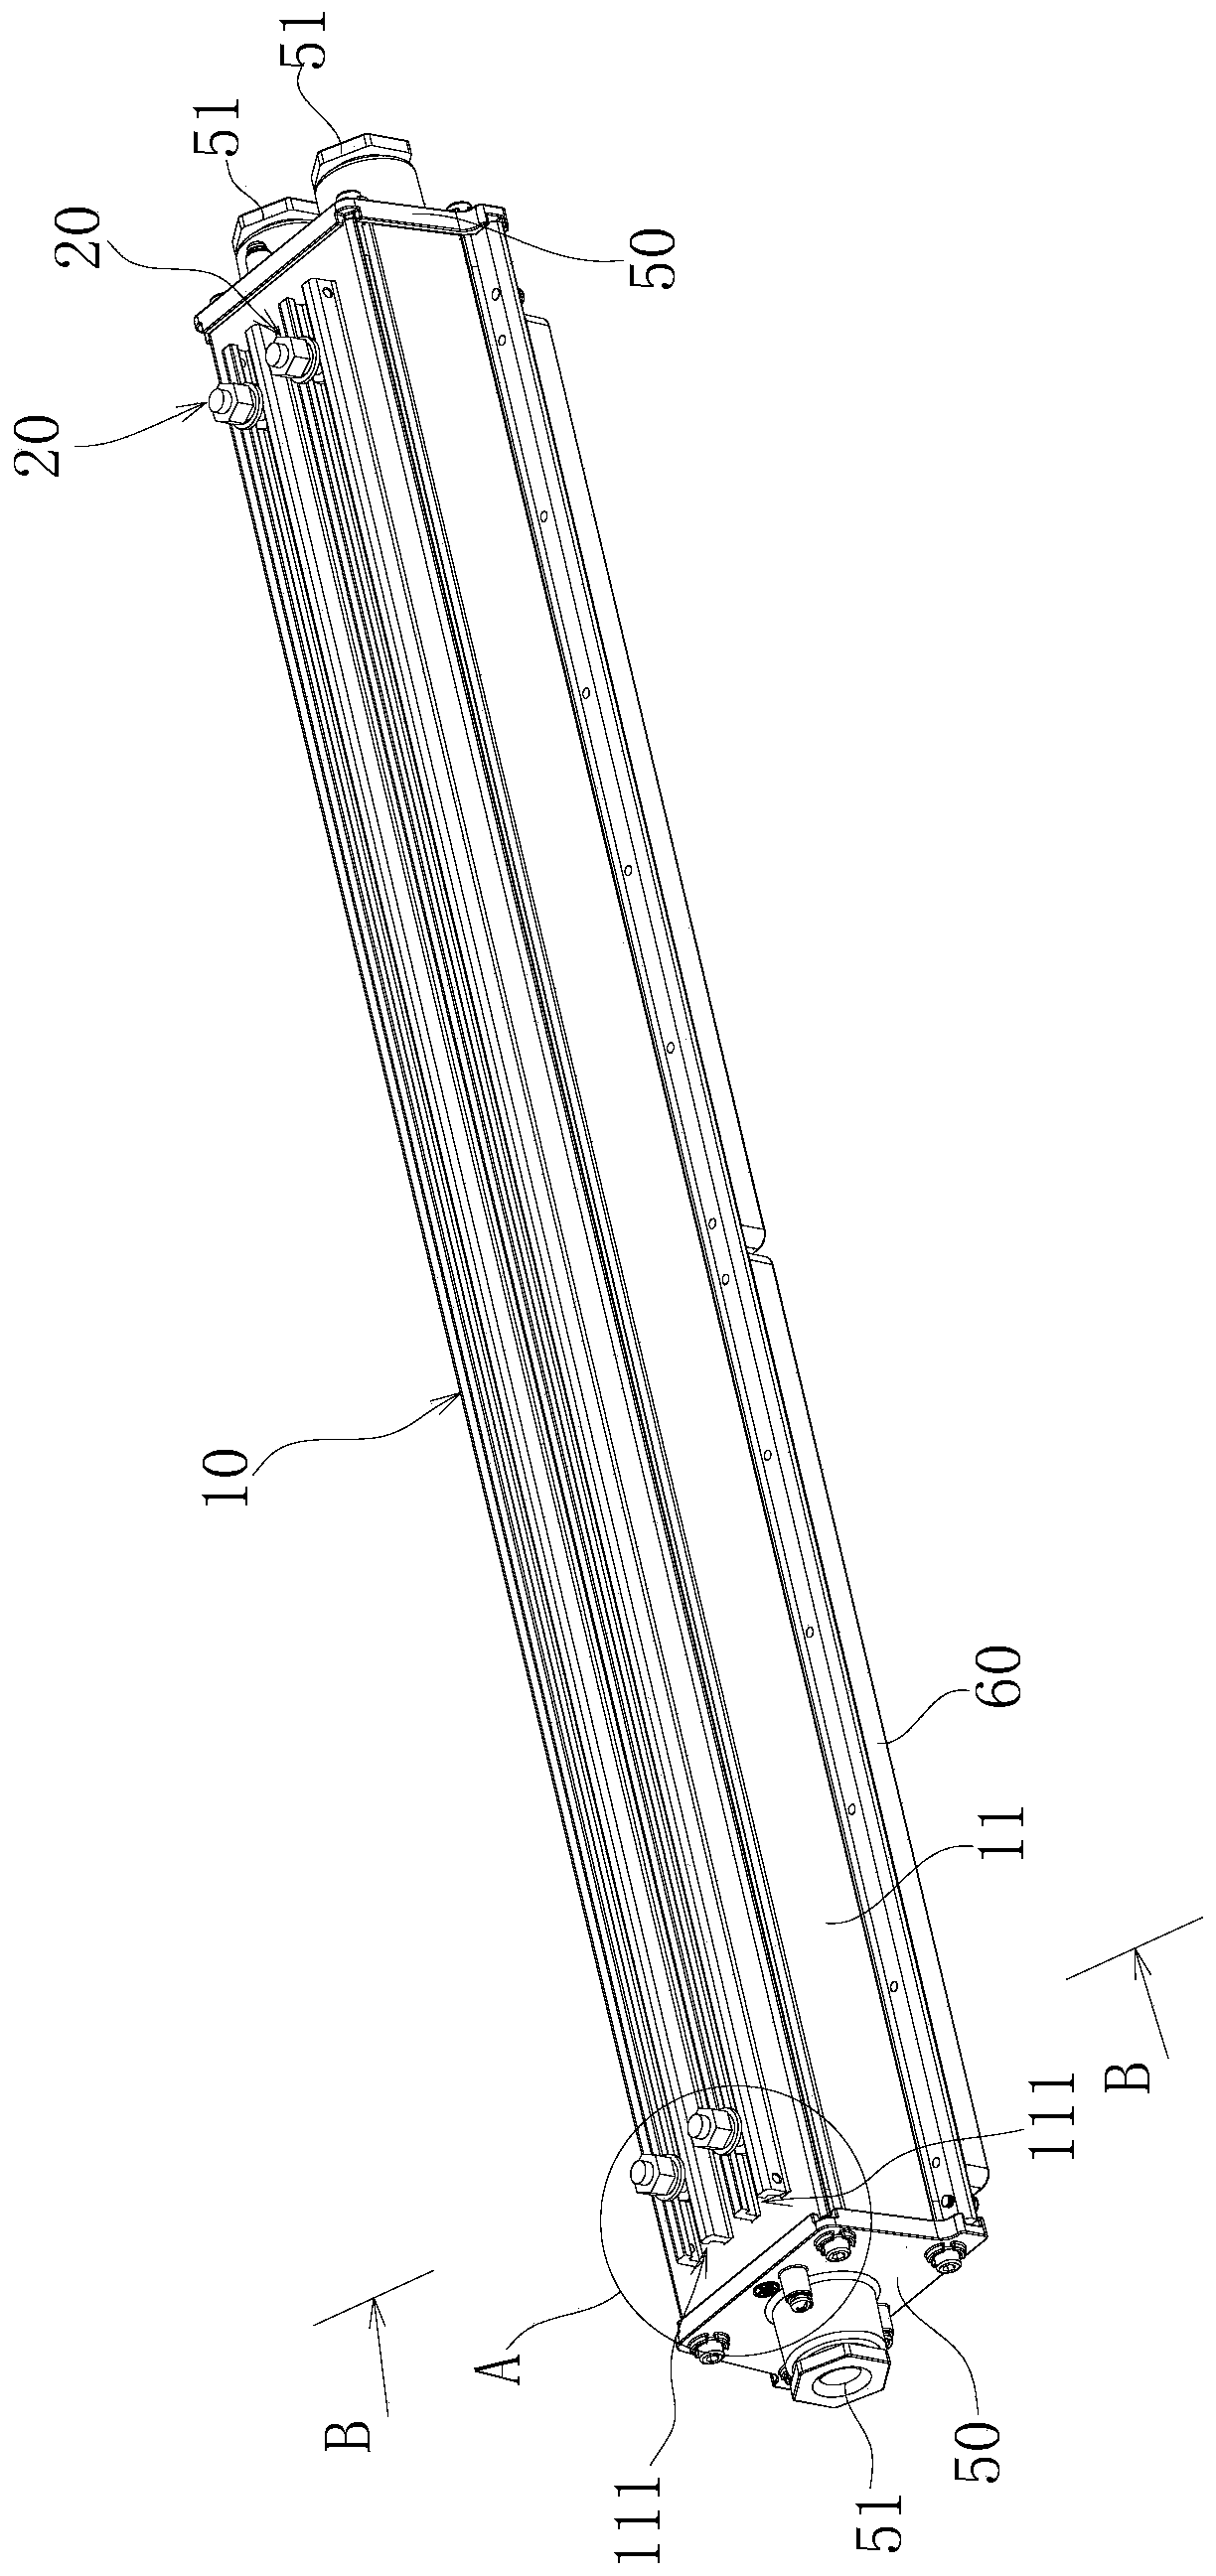 Lamp housing and lamp mounting structure